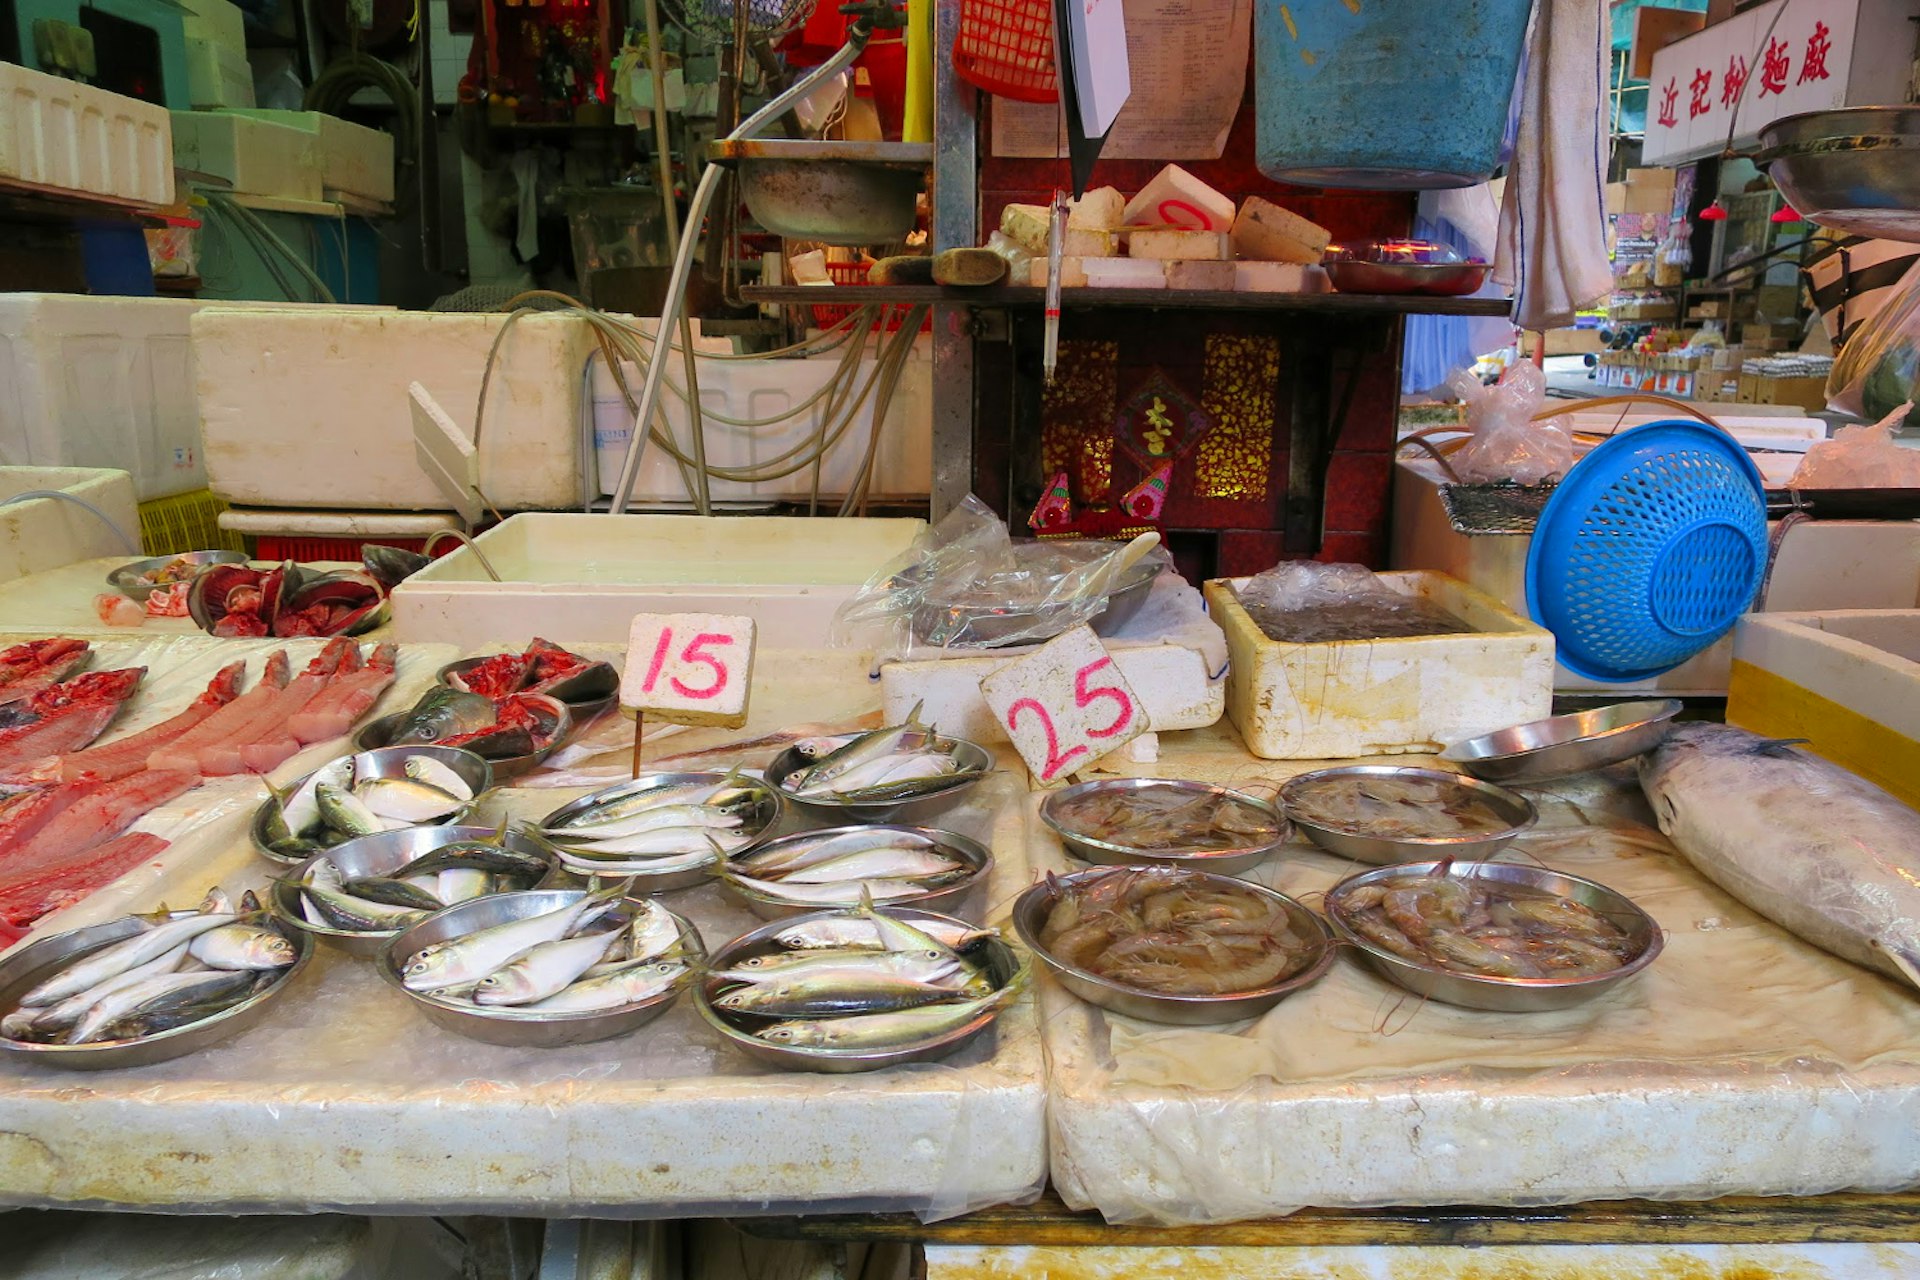 Seafood for sale at a wet market in Central. Image by Megan Eaves / Lonely Planet